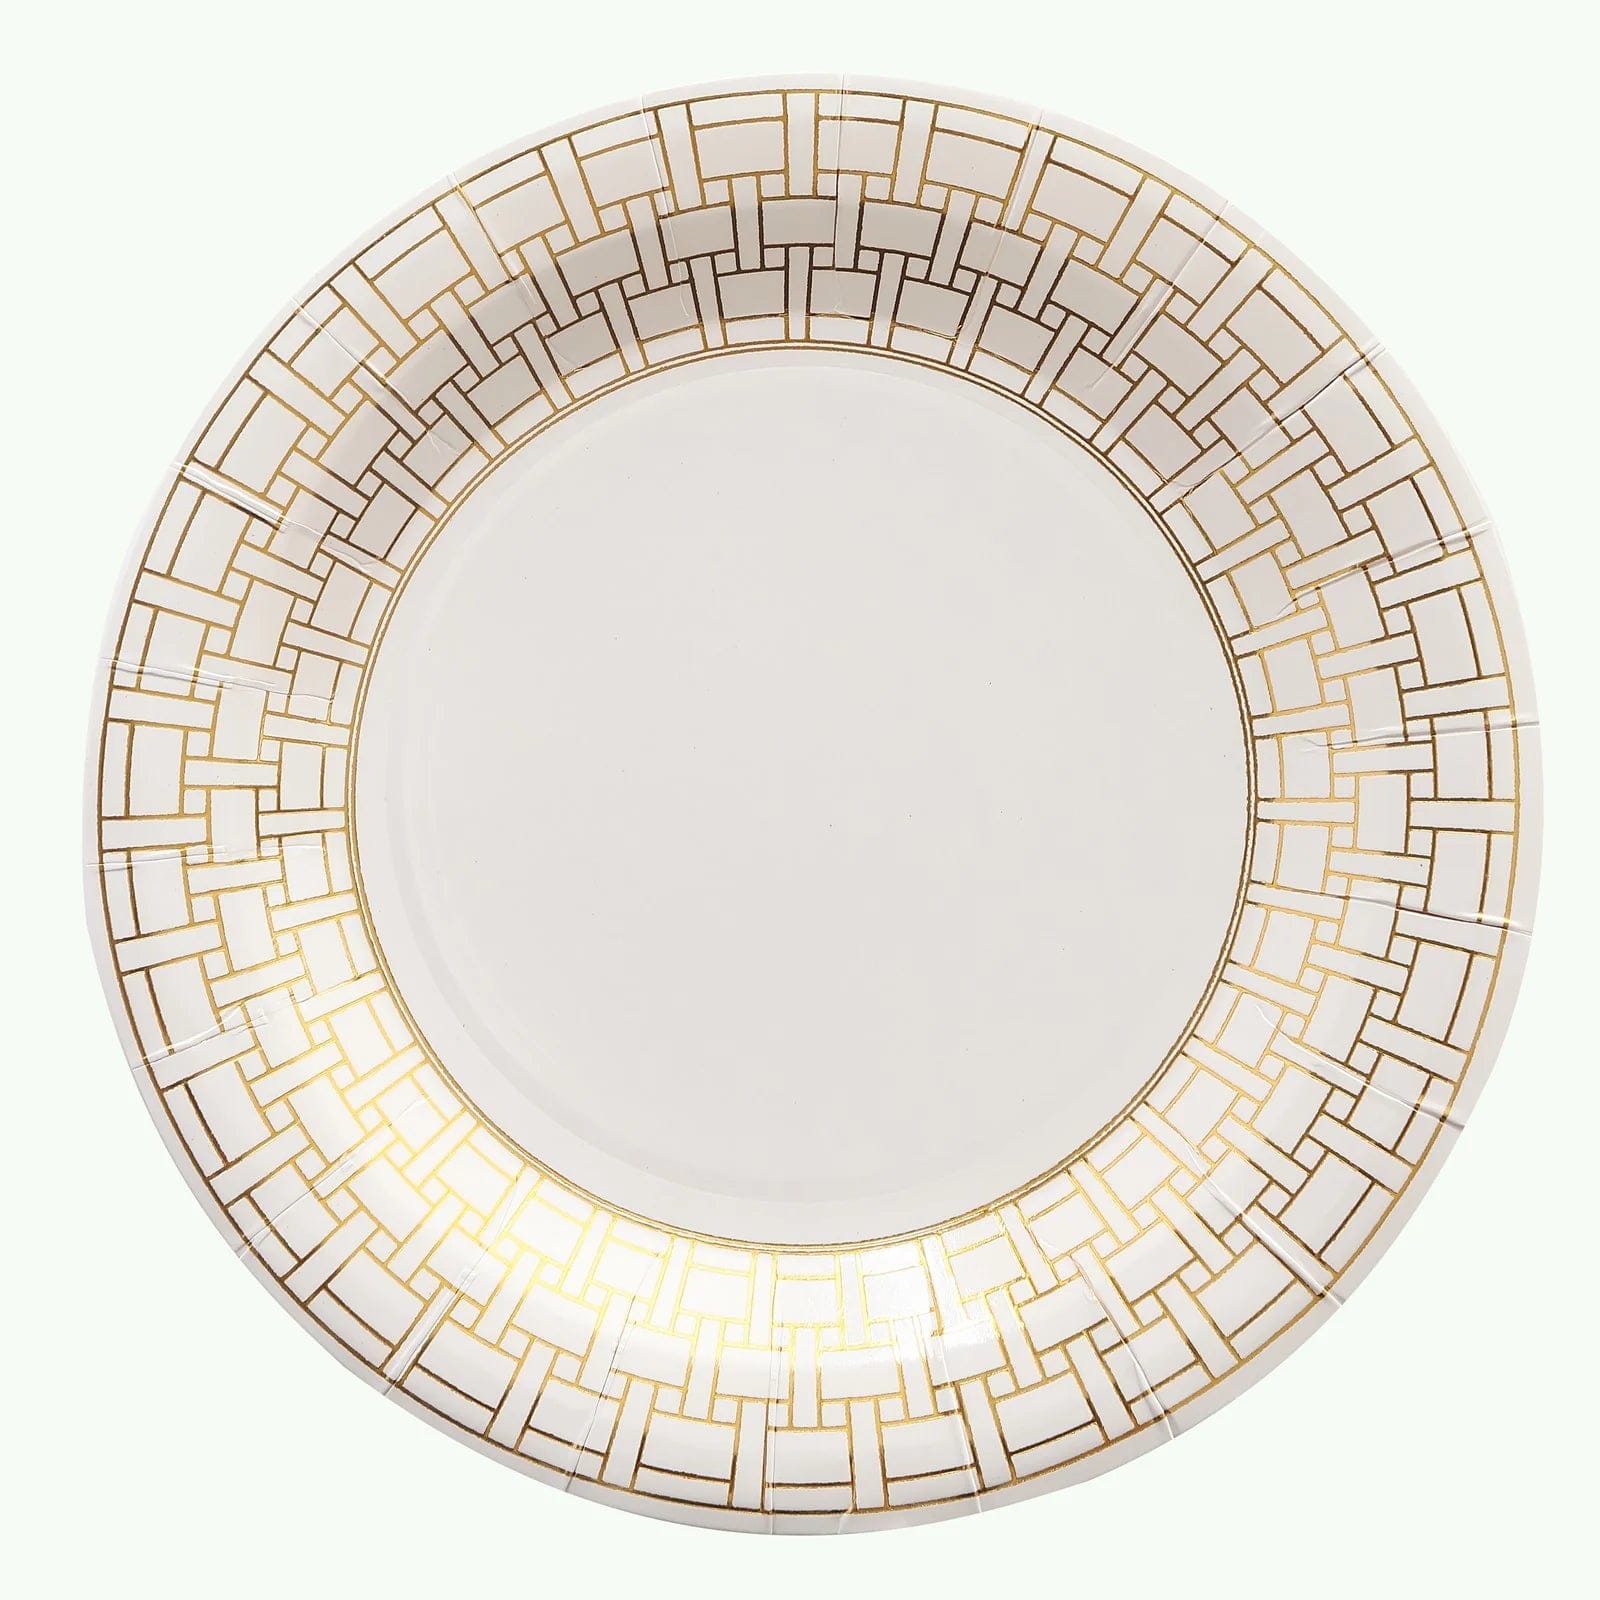 25 Dinner Paper Plates with Gold Basketweave Pattern Rim DSP_PPR0028_9_WHGD